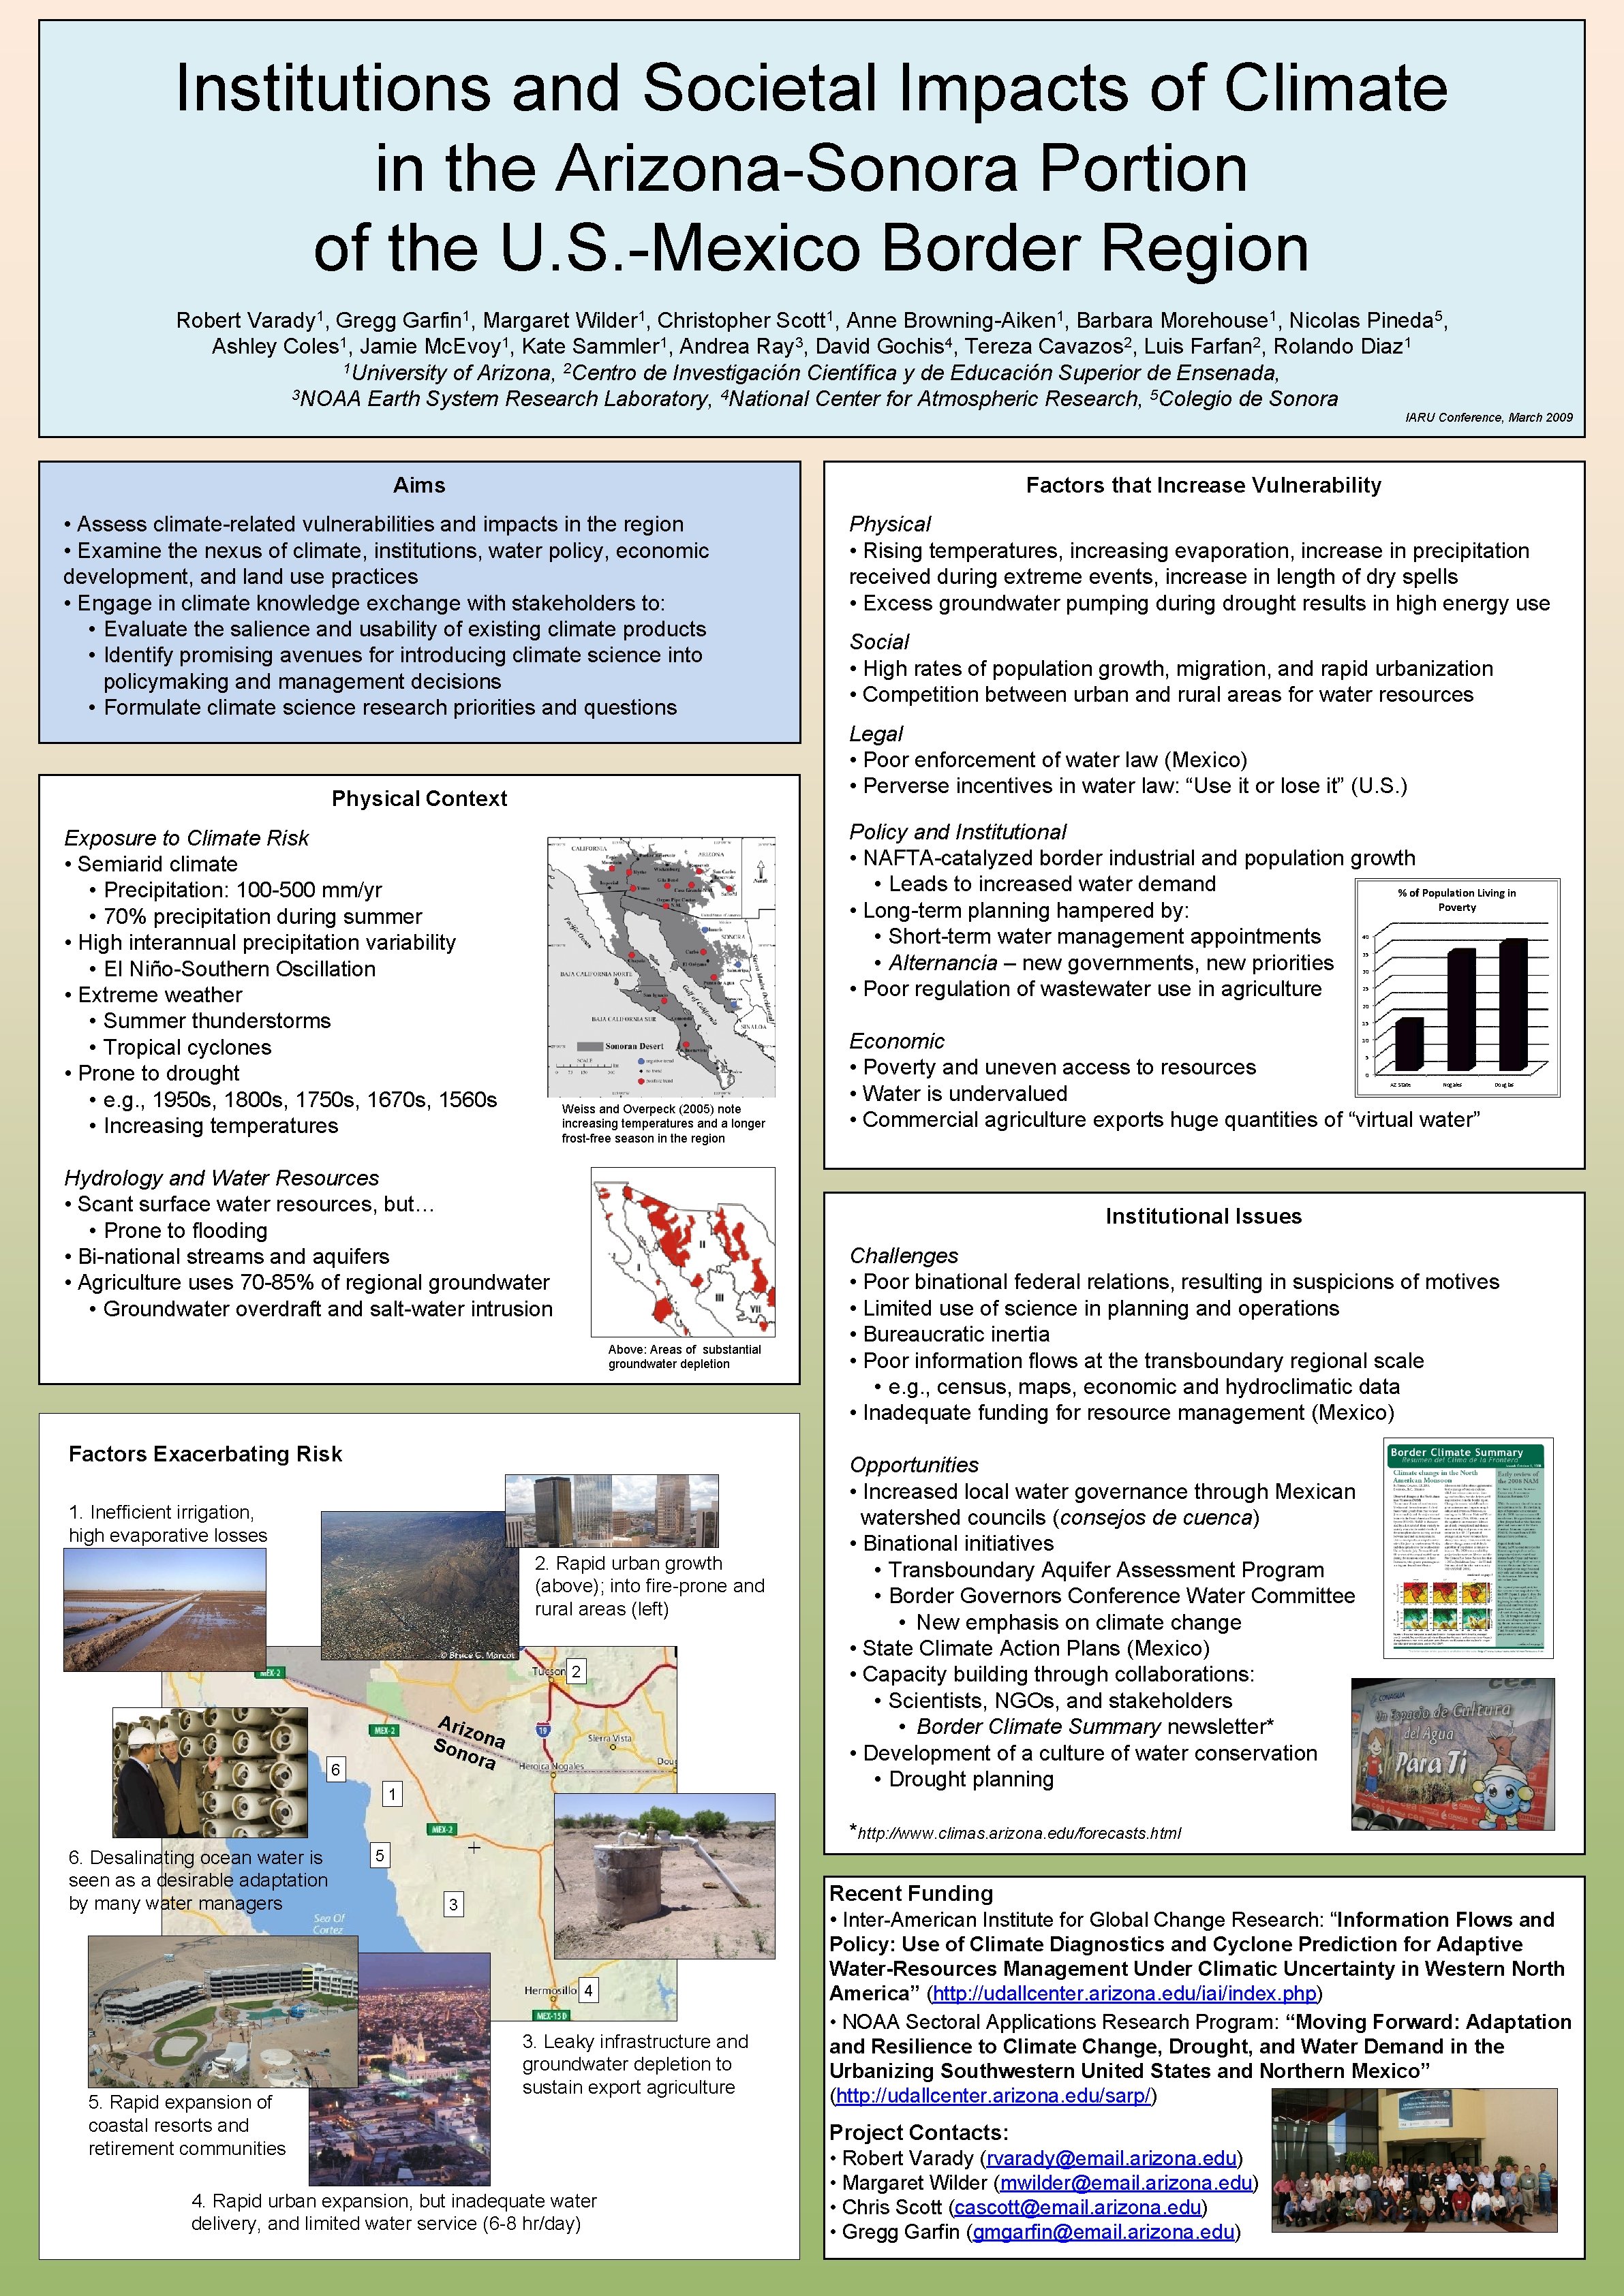 Institutions and Societal Impacts of Climate in the Arizona-Sonora Portion of the U. S.